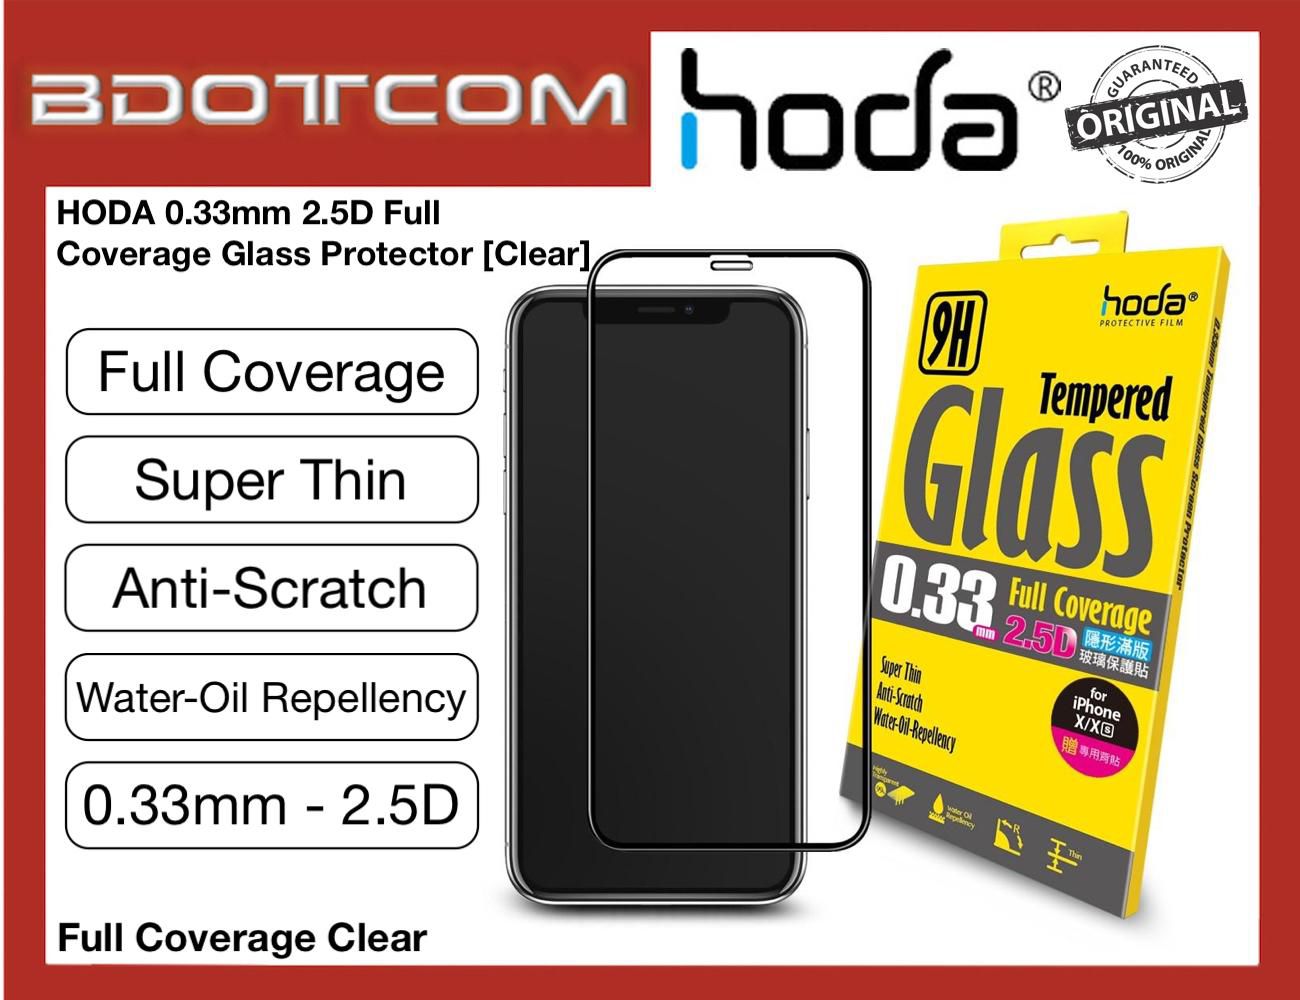 HODA 0.33mm 2.5D Glass Protector for Apple iPhone 11 Pro ( Clear)